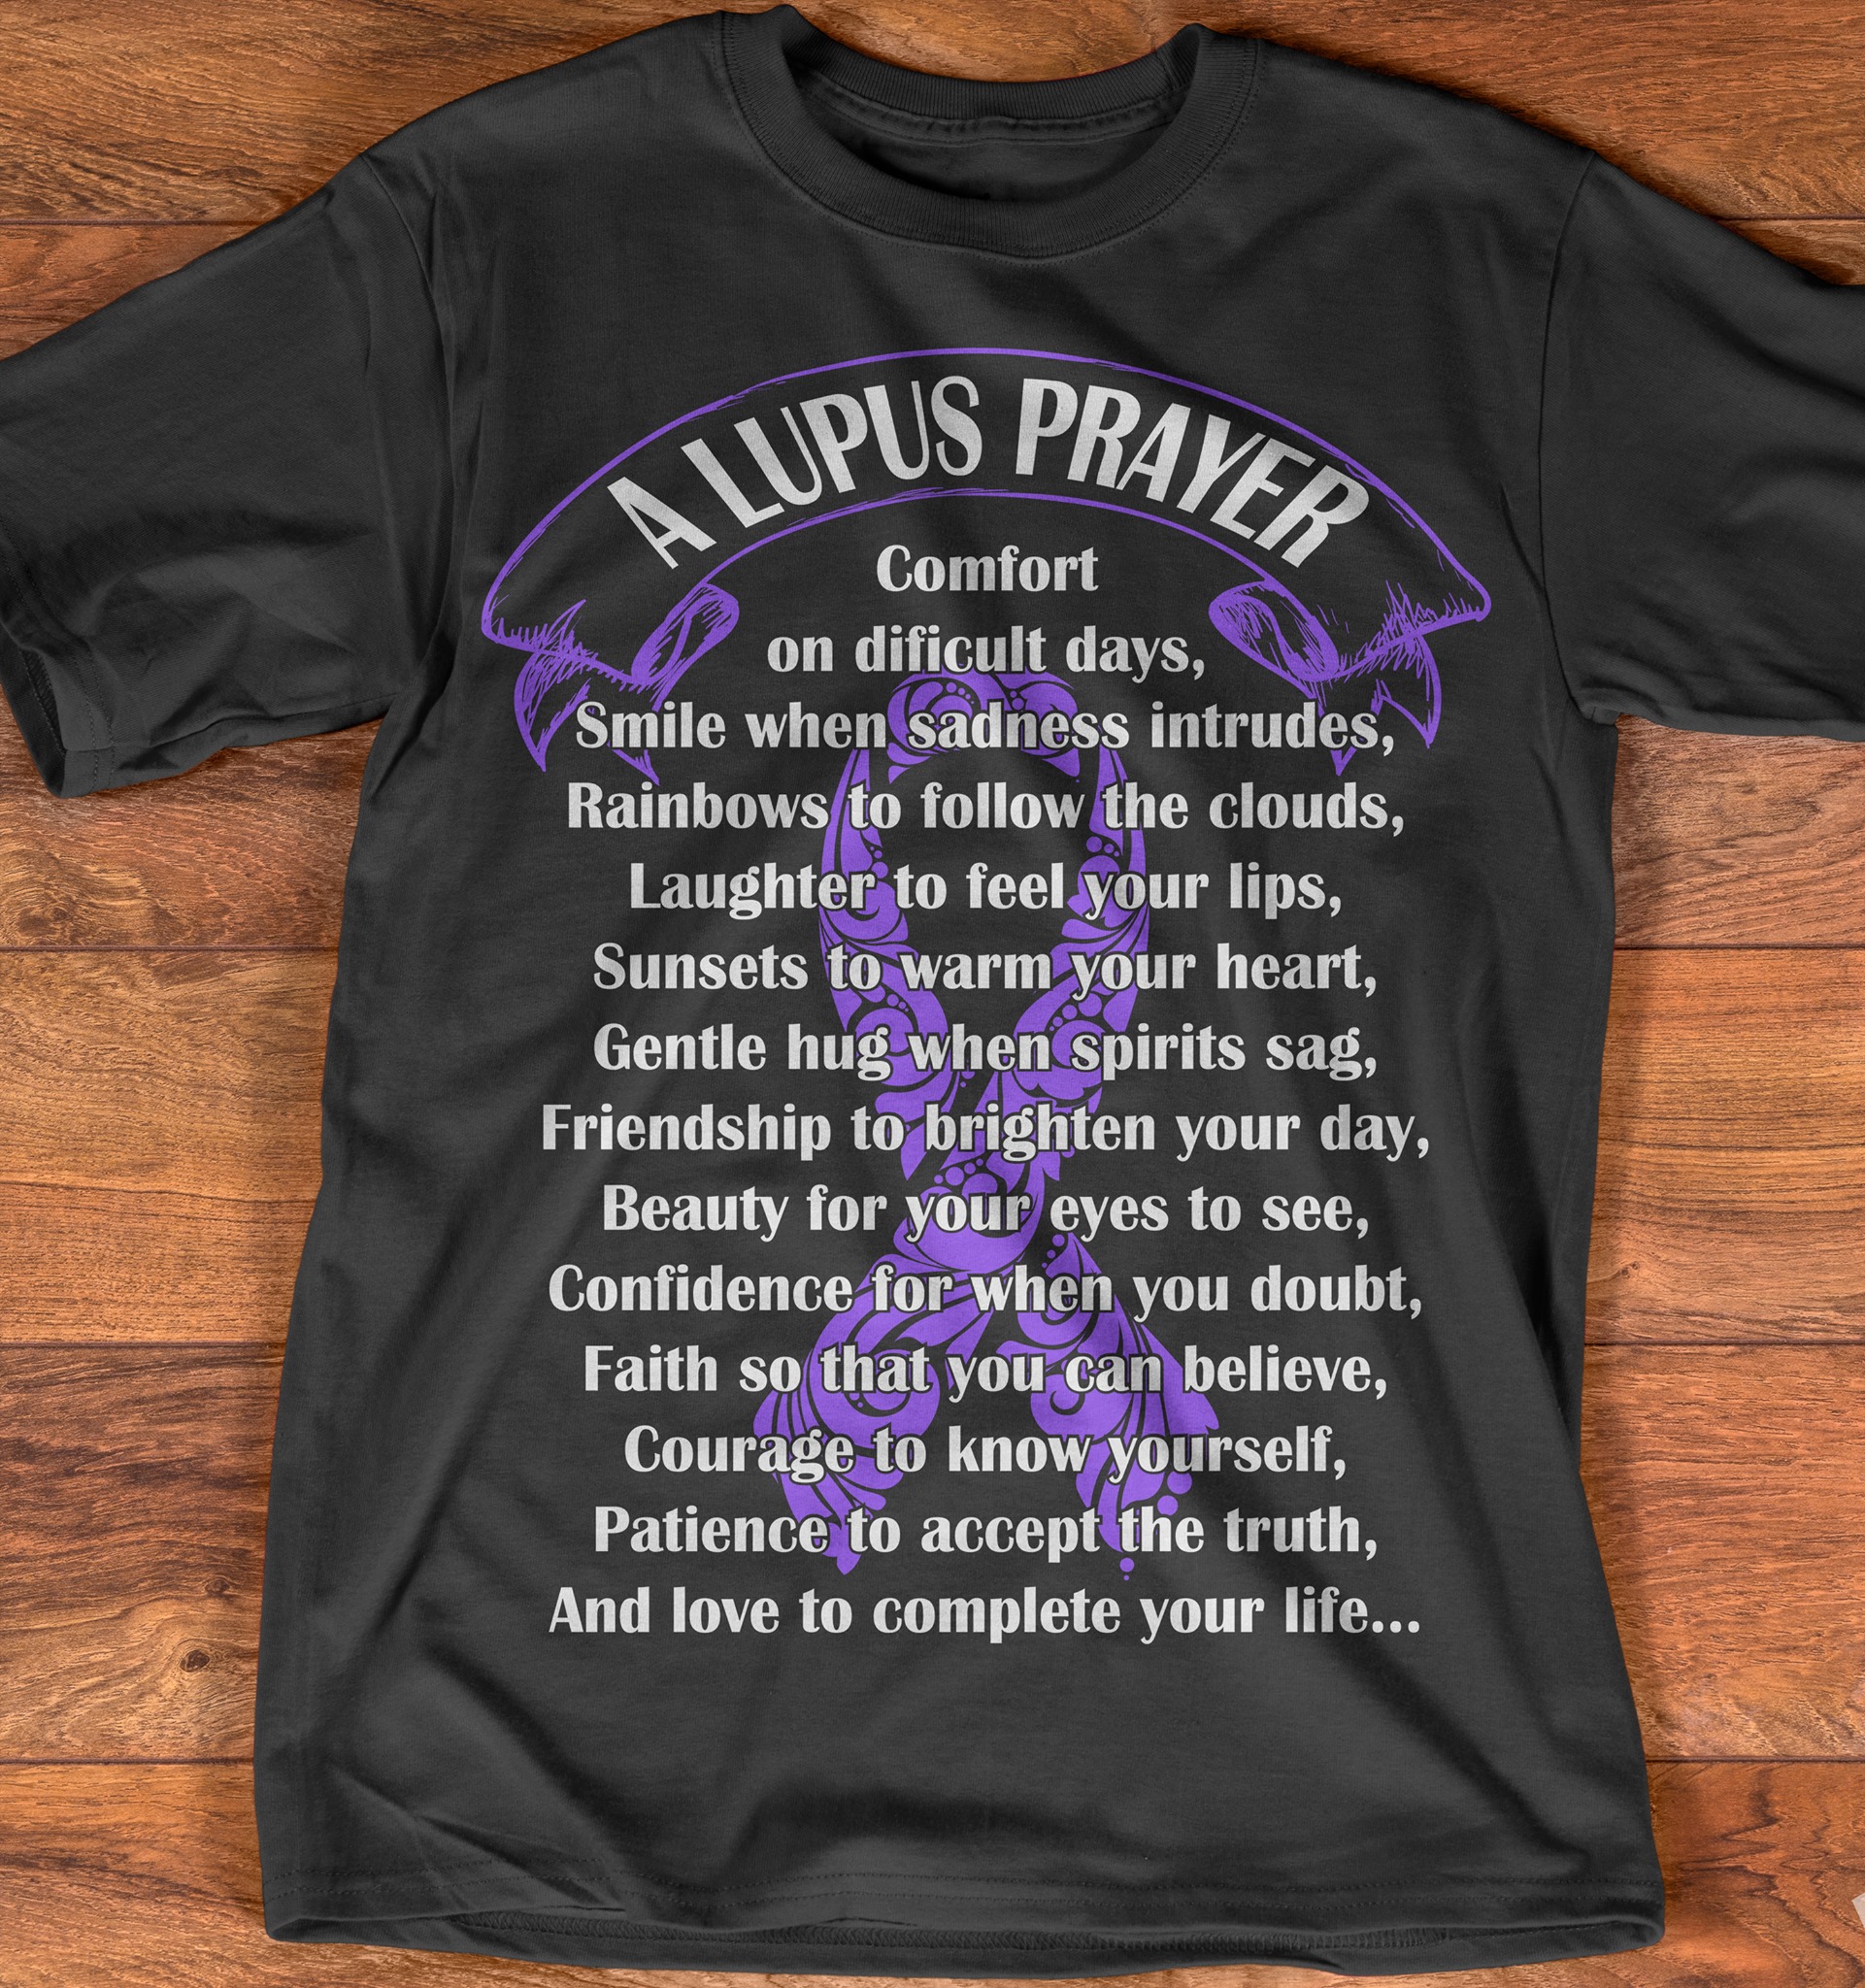 A lupus prayer - Comfort on dificult days, smile when sadness intrudes